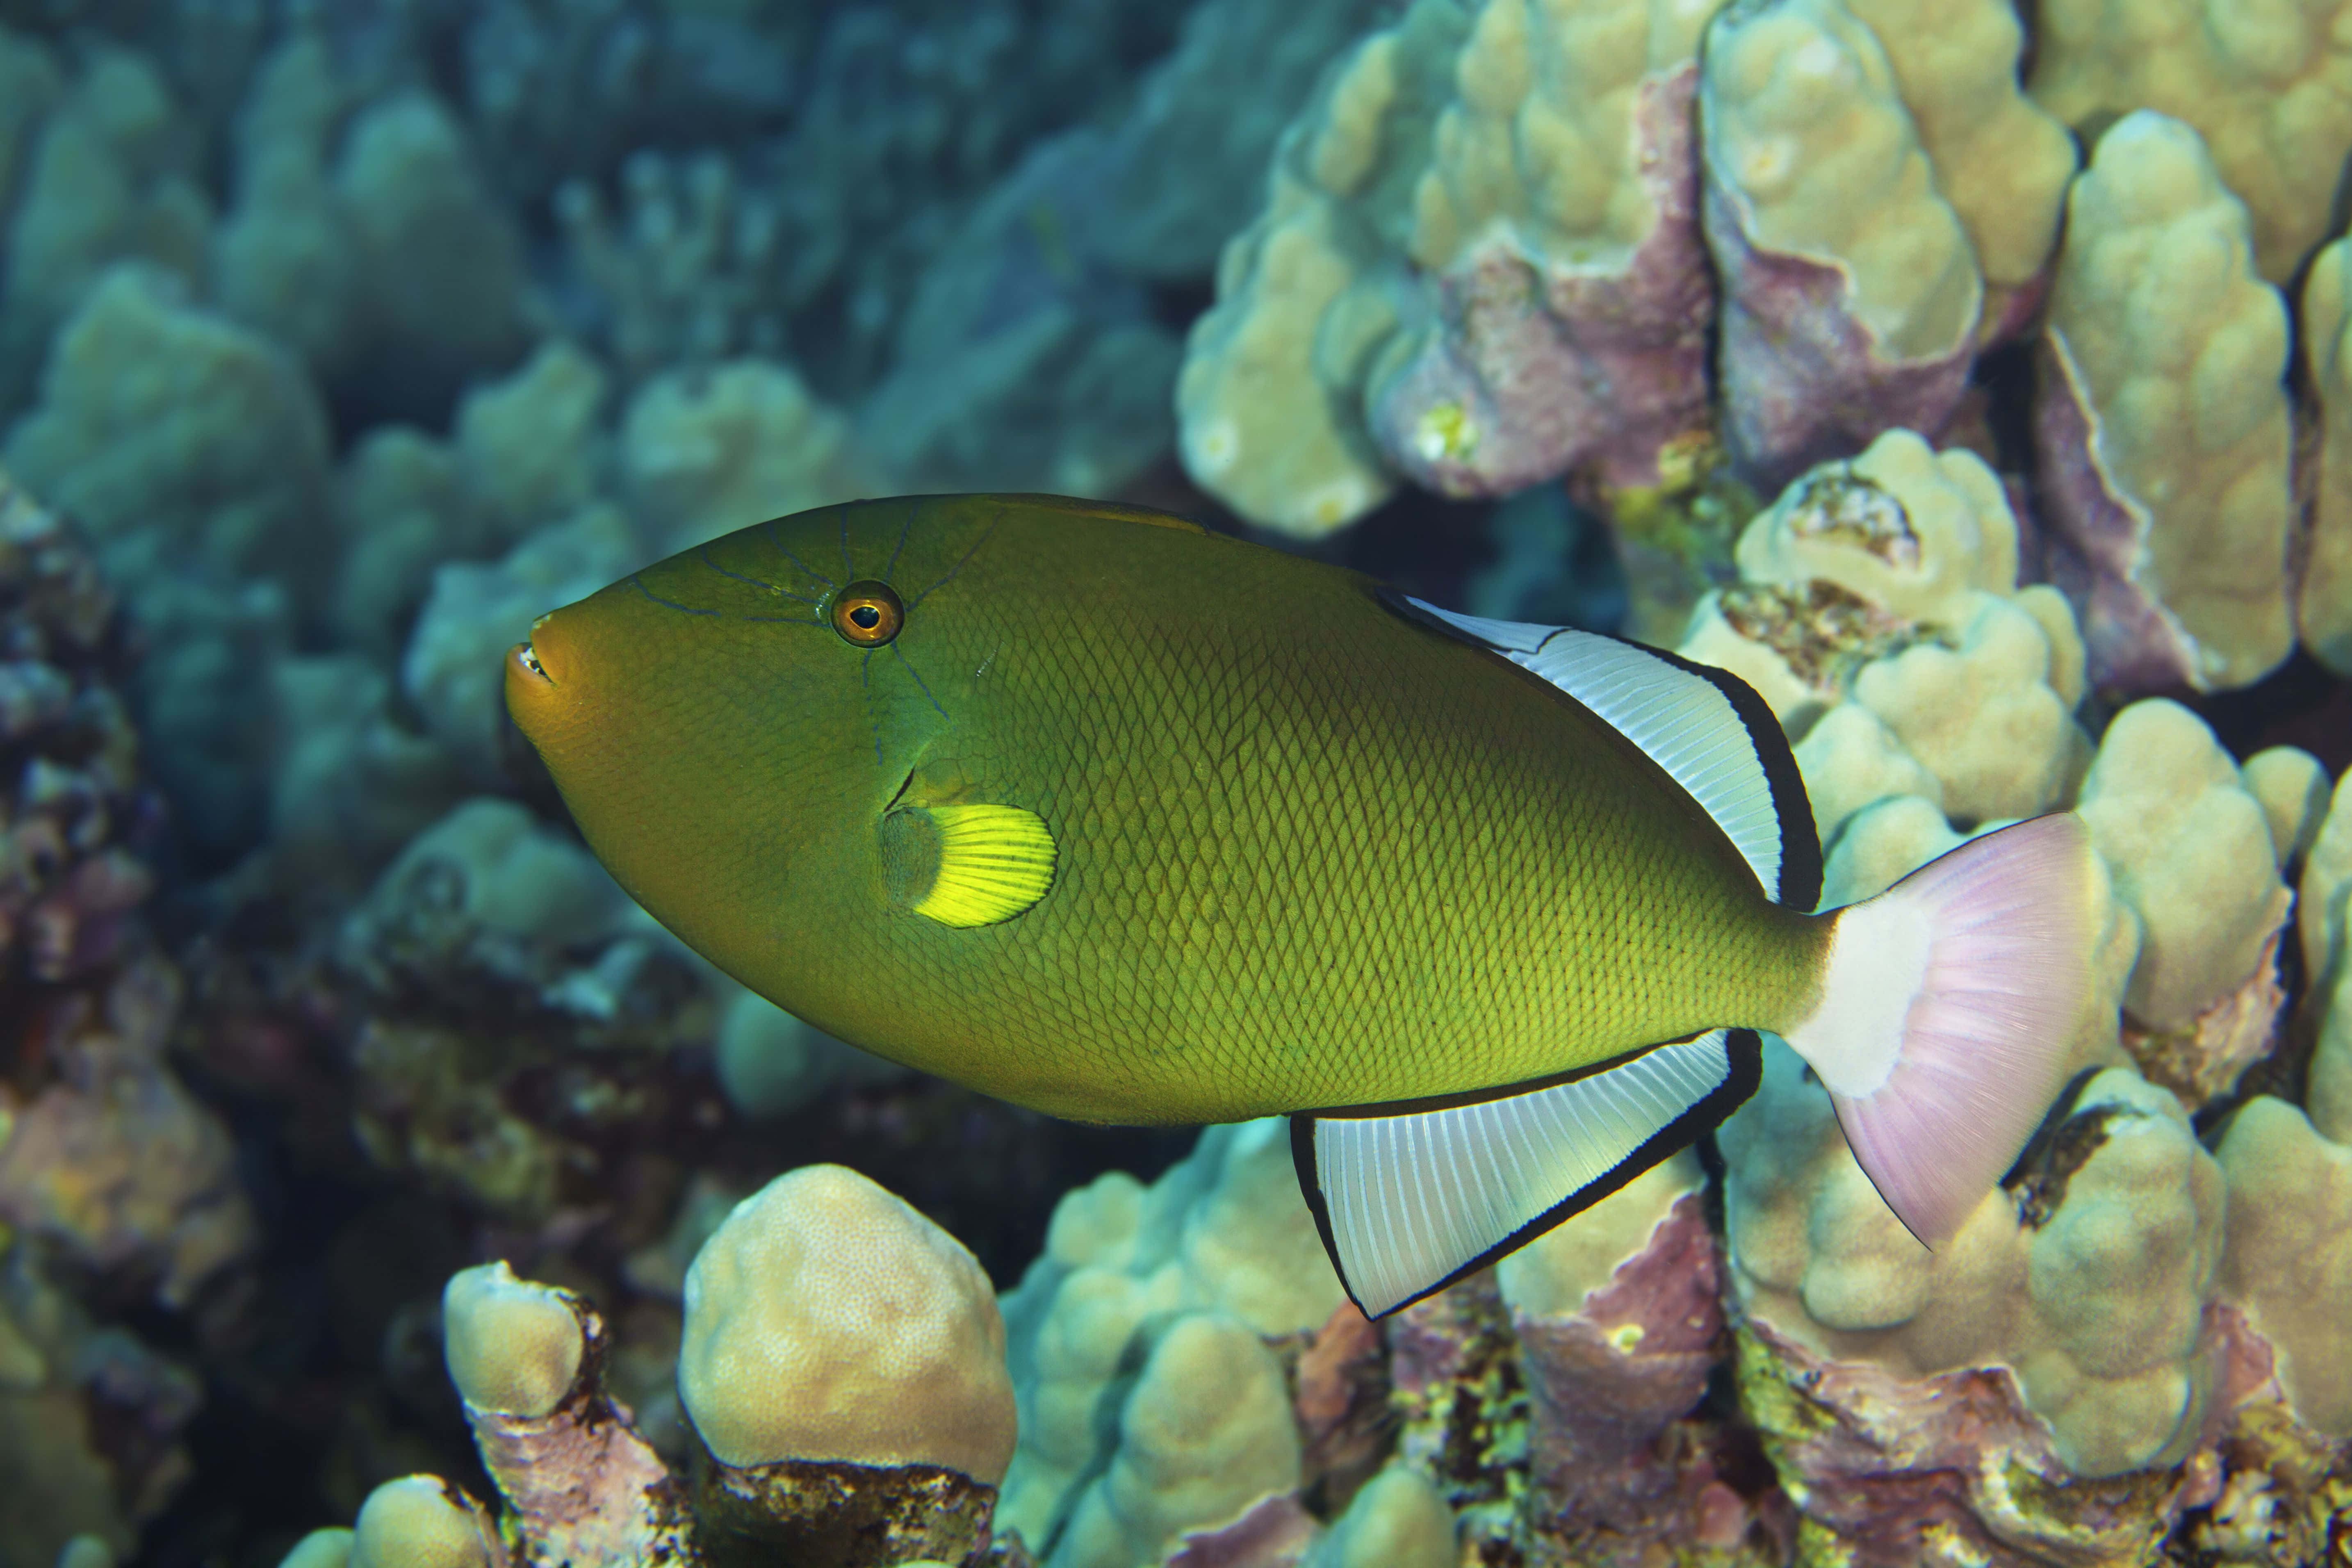 Caption: A Vibrant Triggerfish Swimming In The Ocean Depths Wallpaper